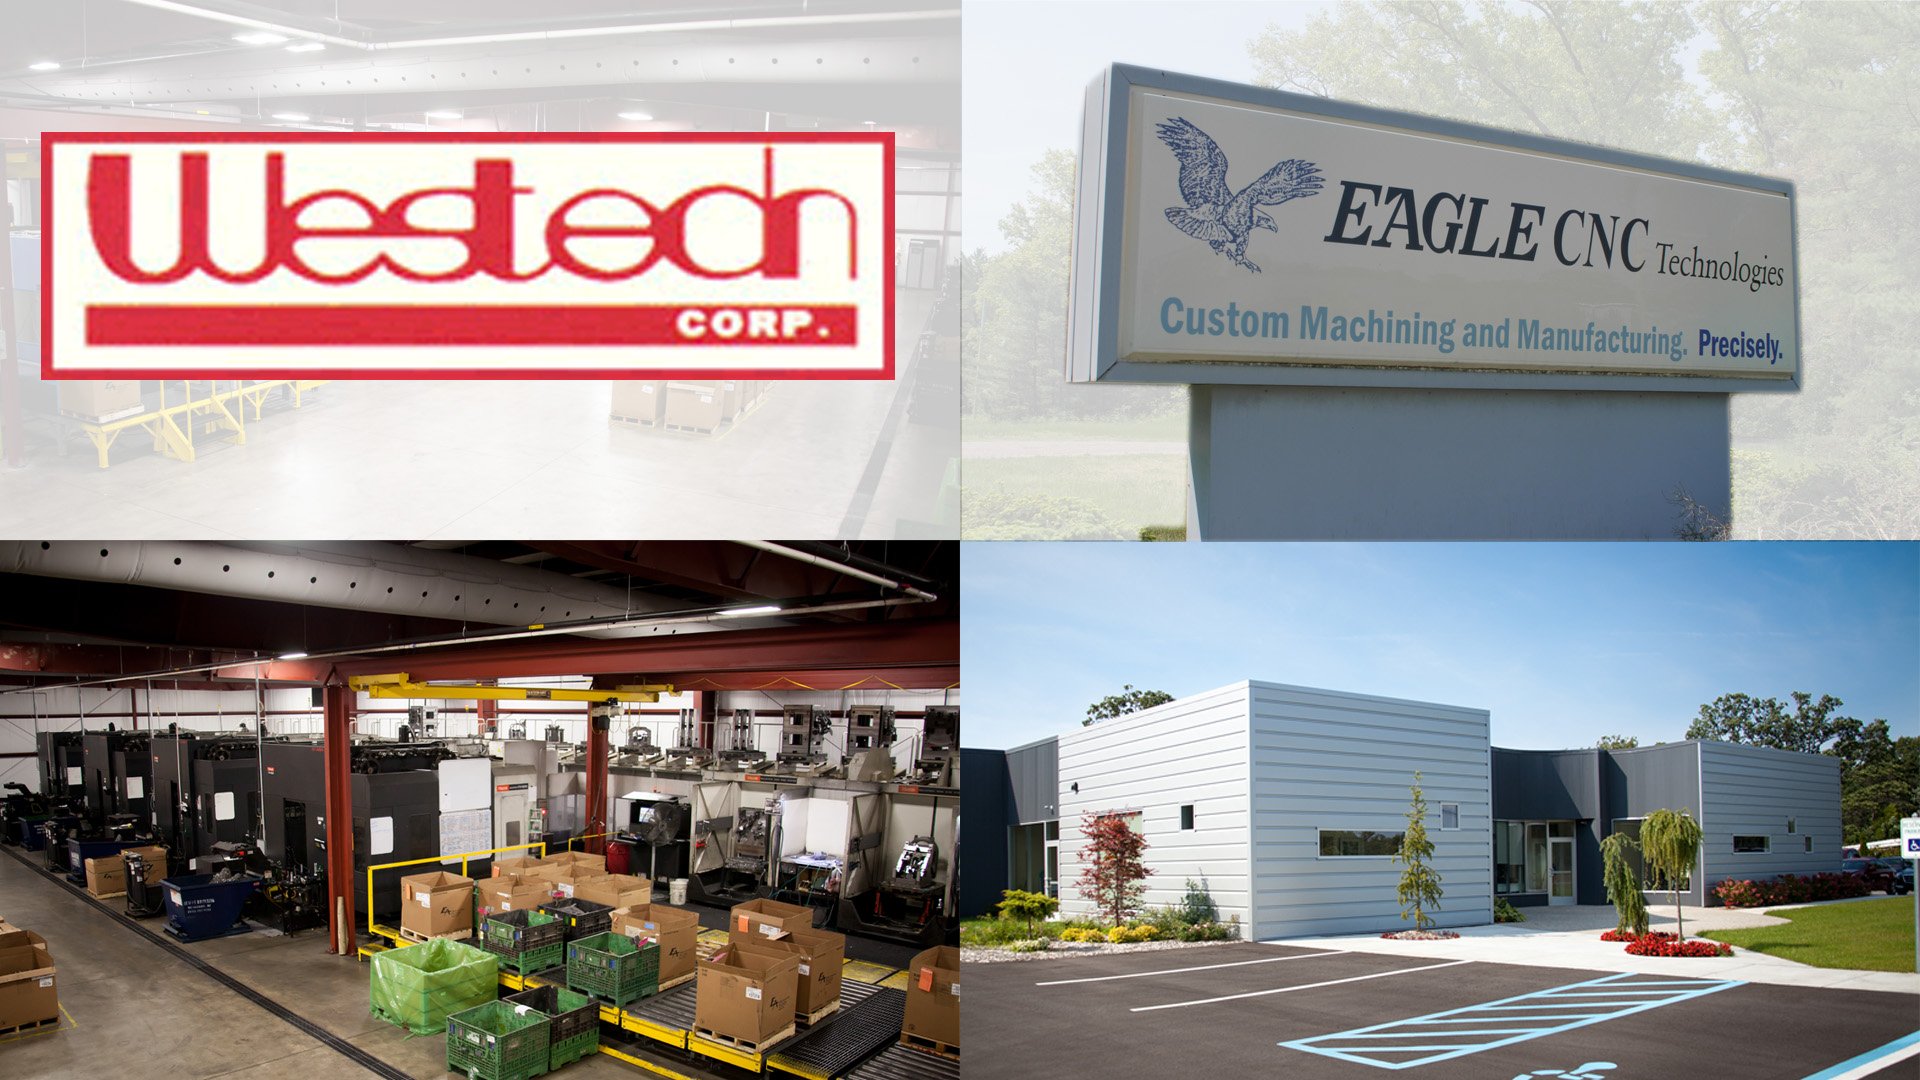 Westech Corp. and Eagle CNC